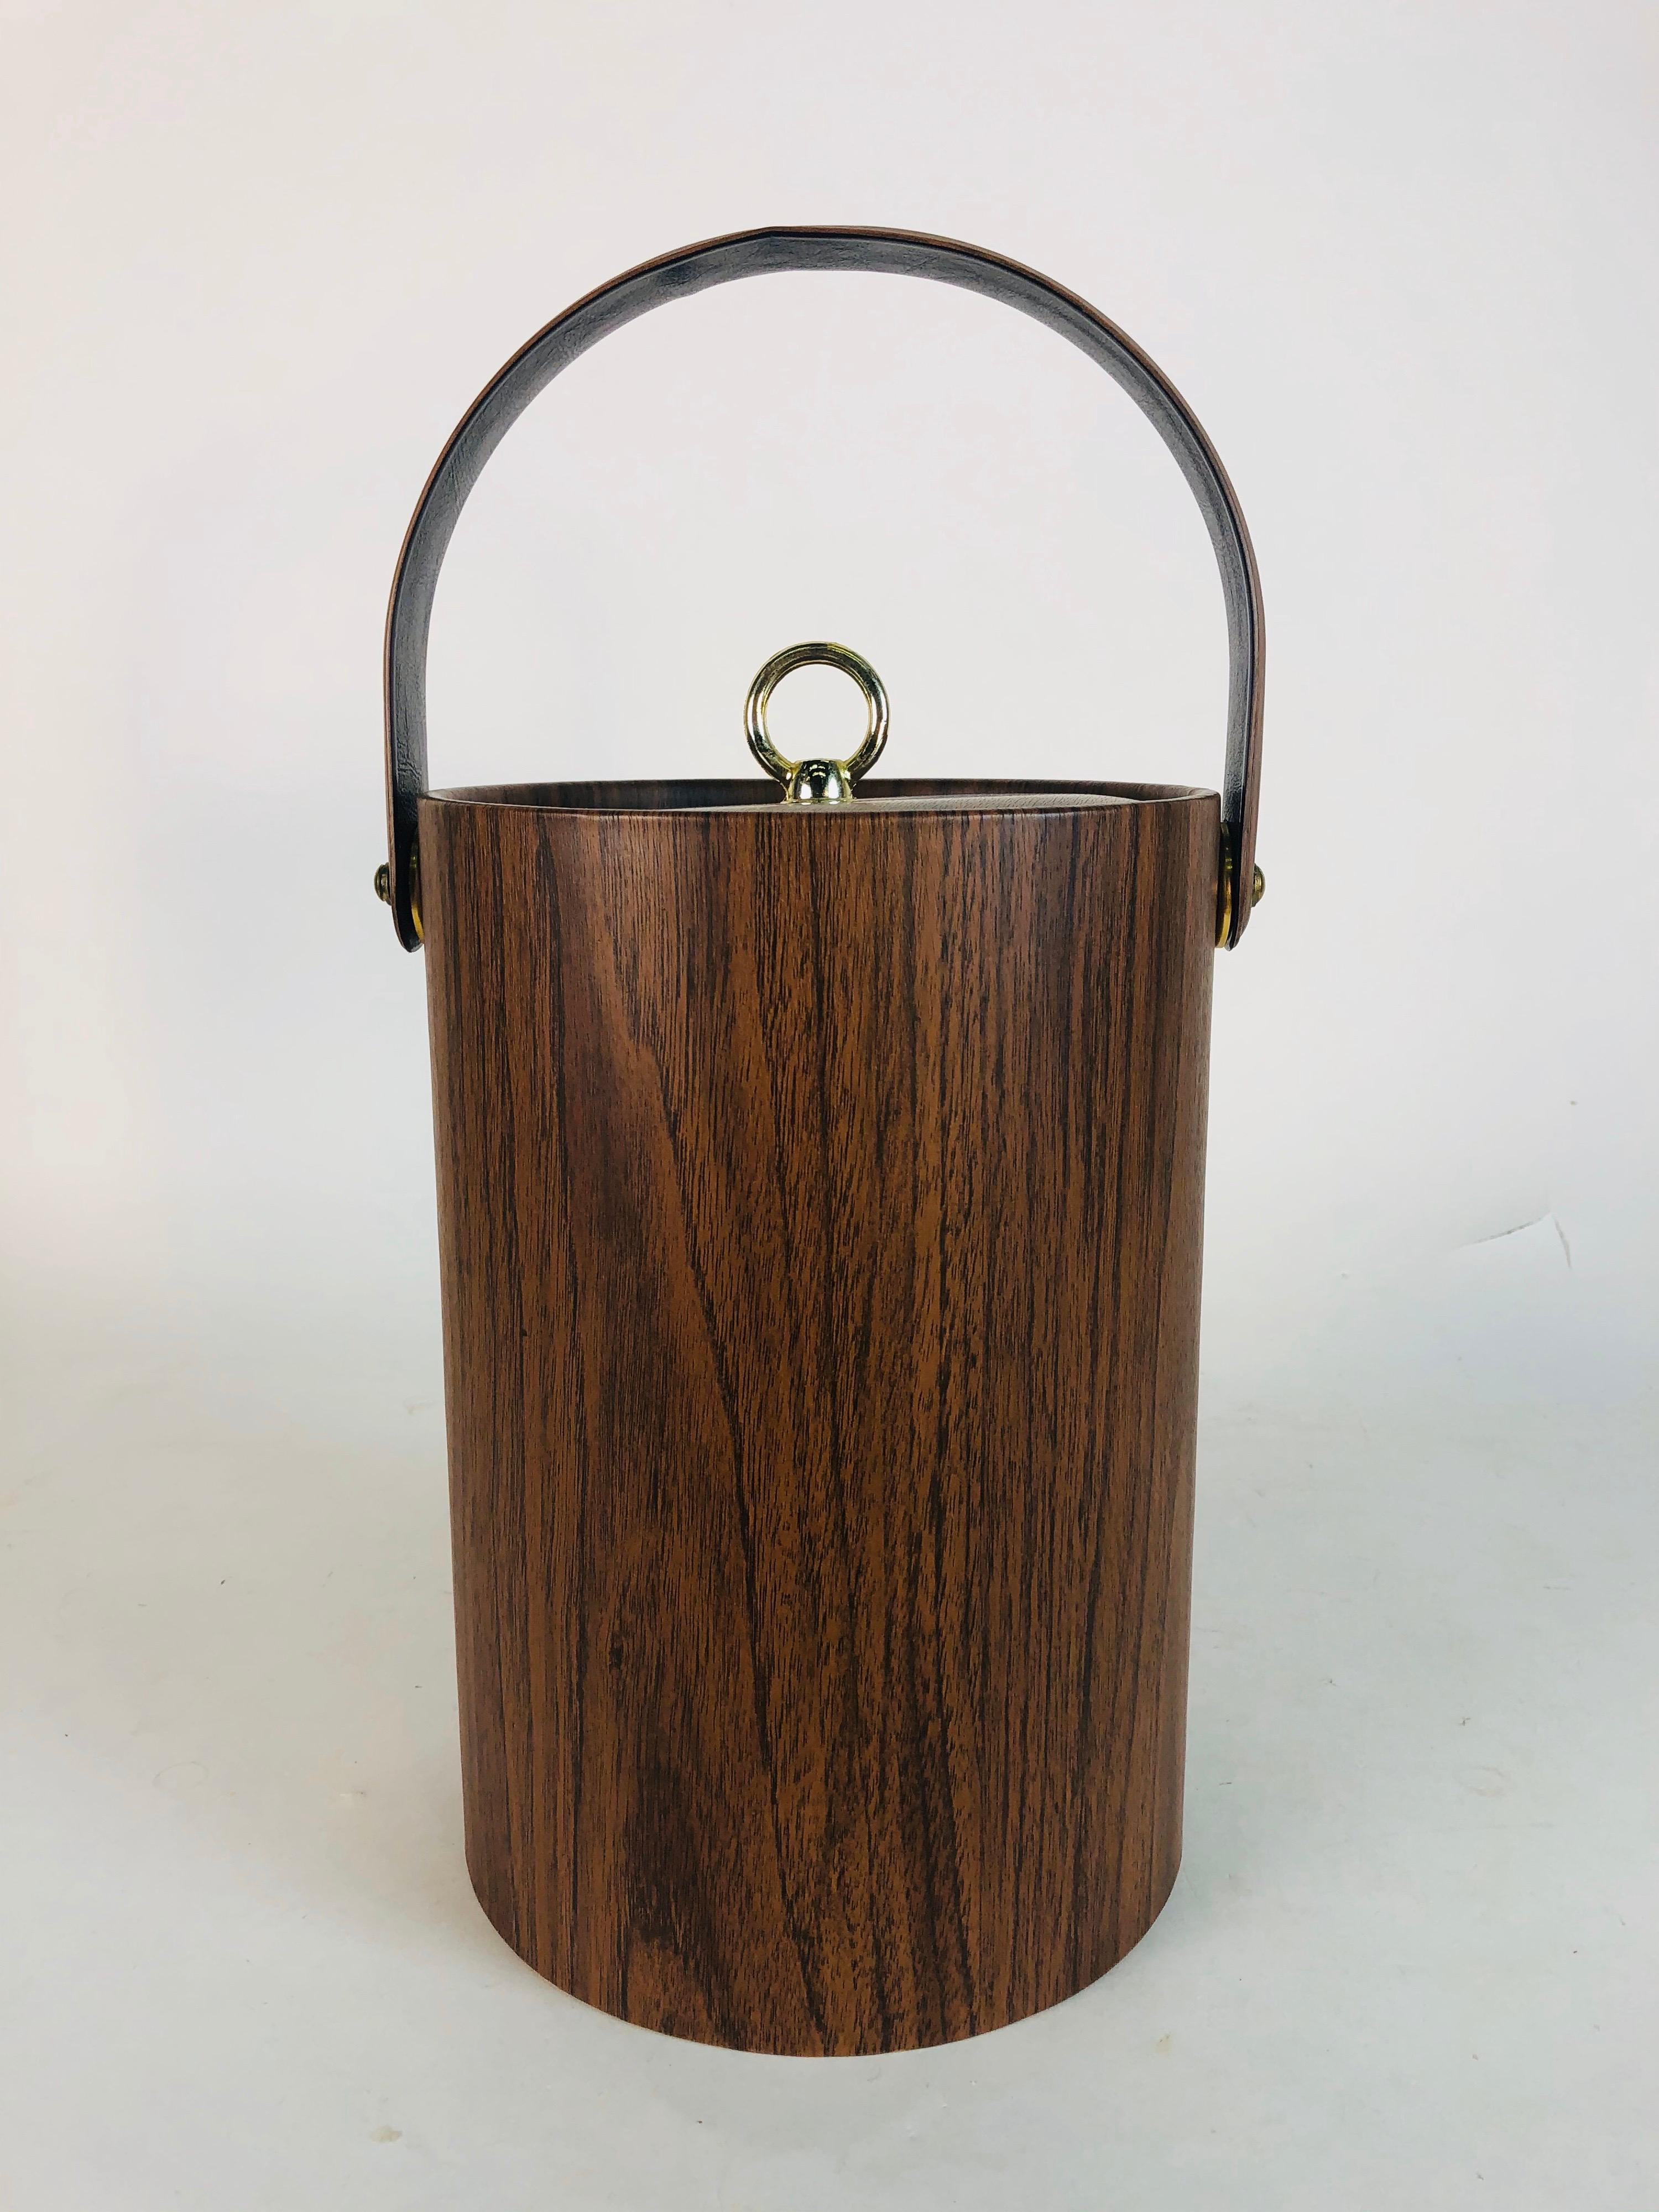 1960s tall vinyl faux-wood grain handled ice bucket with metal knob. Excellent condition, holds a lot of ice! No marks.